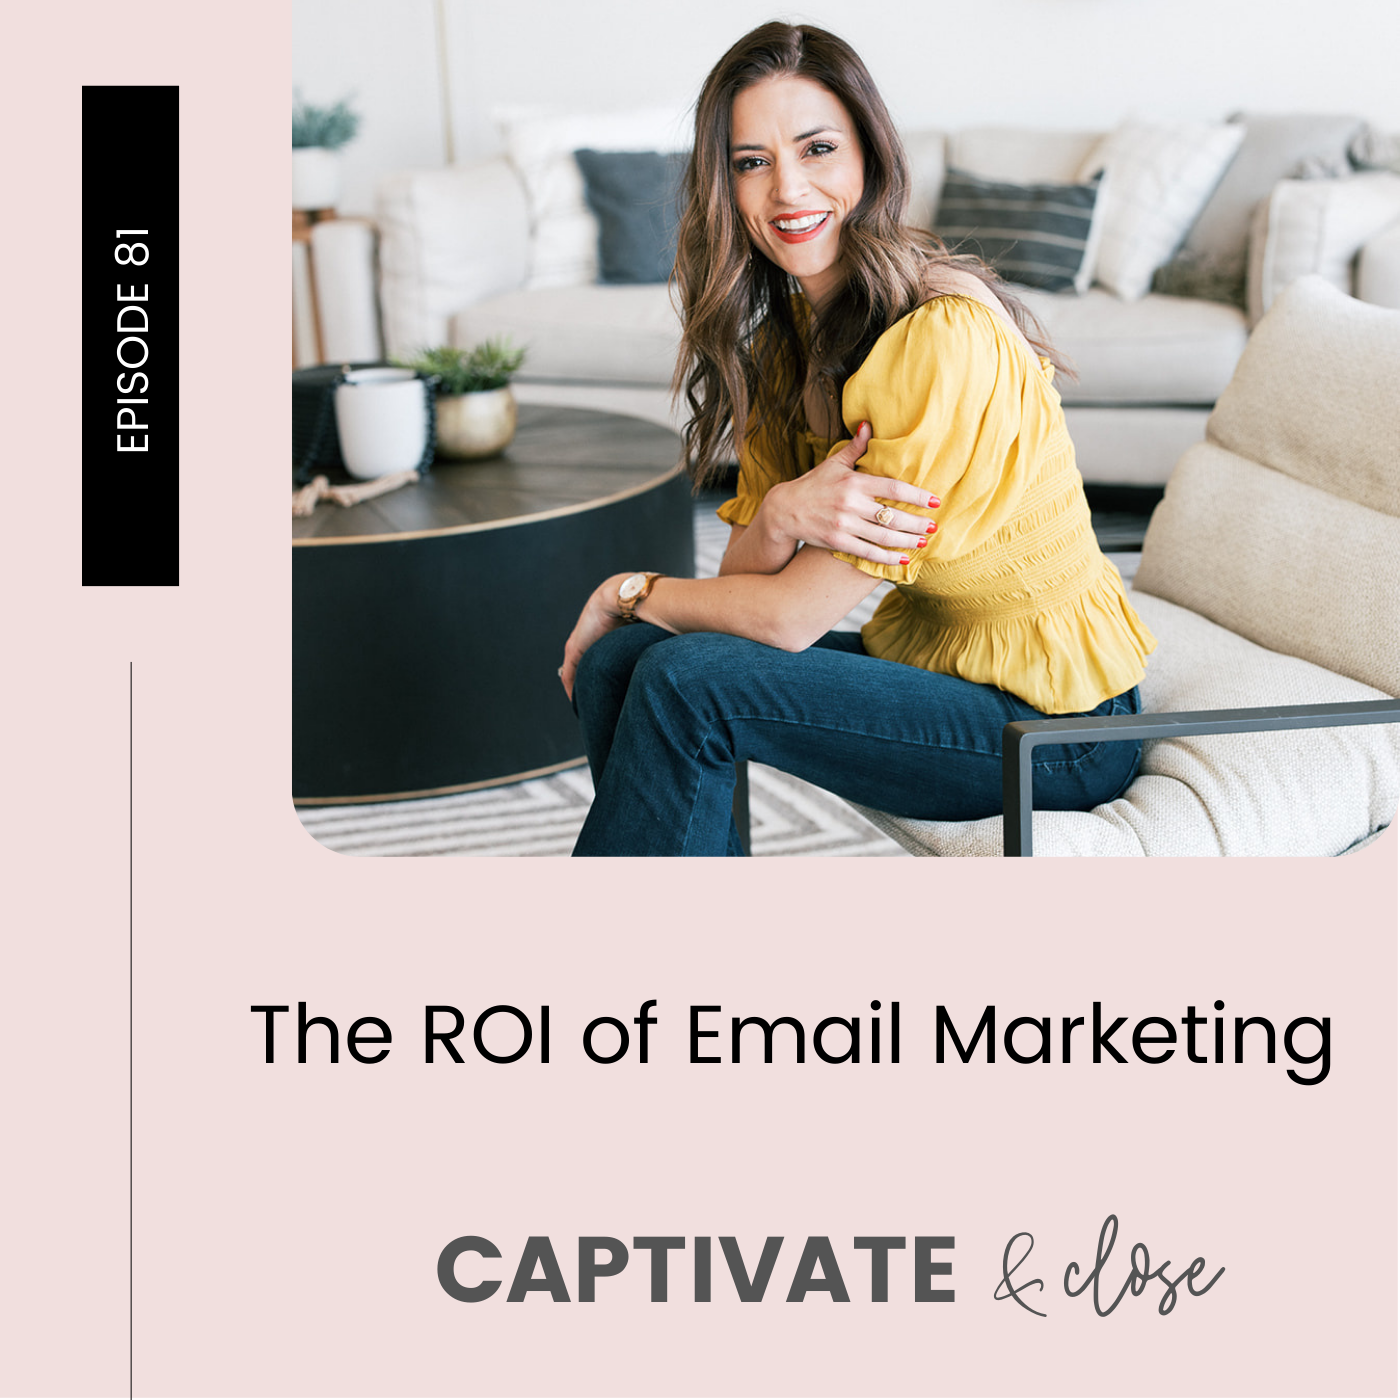 The ROI of Email Marketing